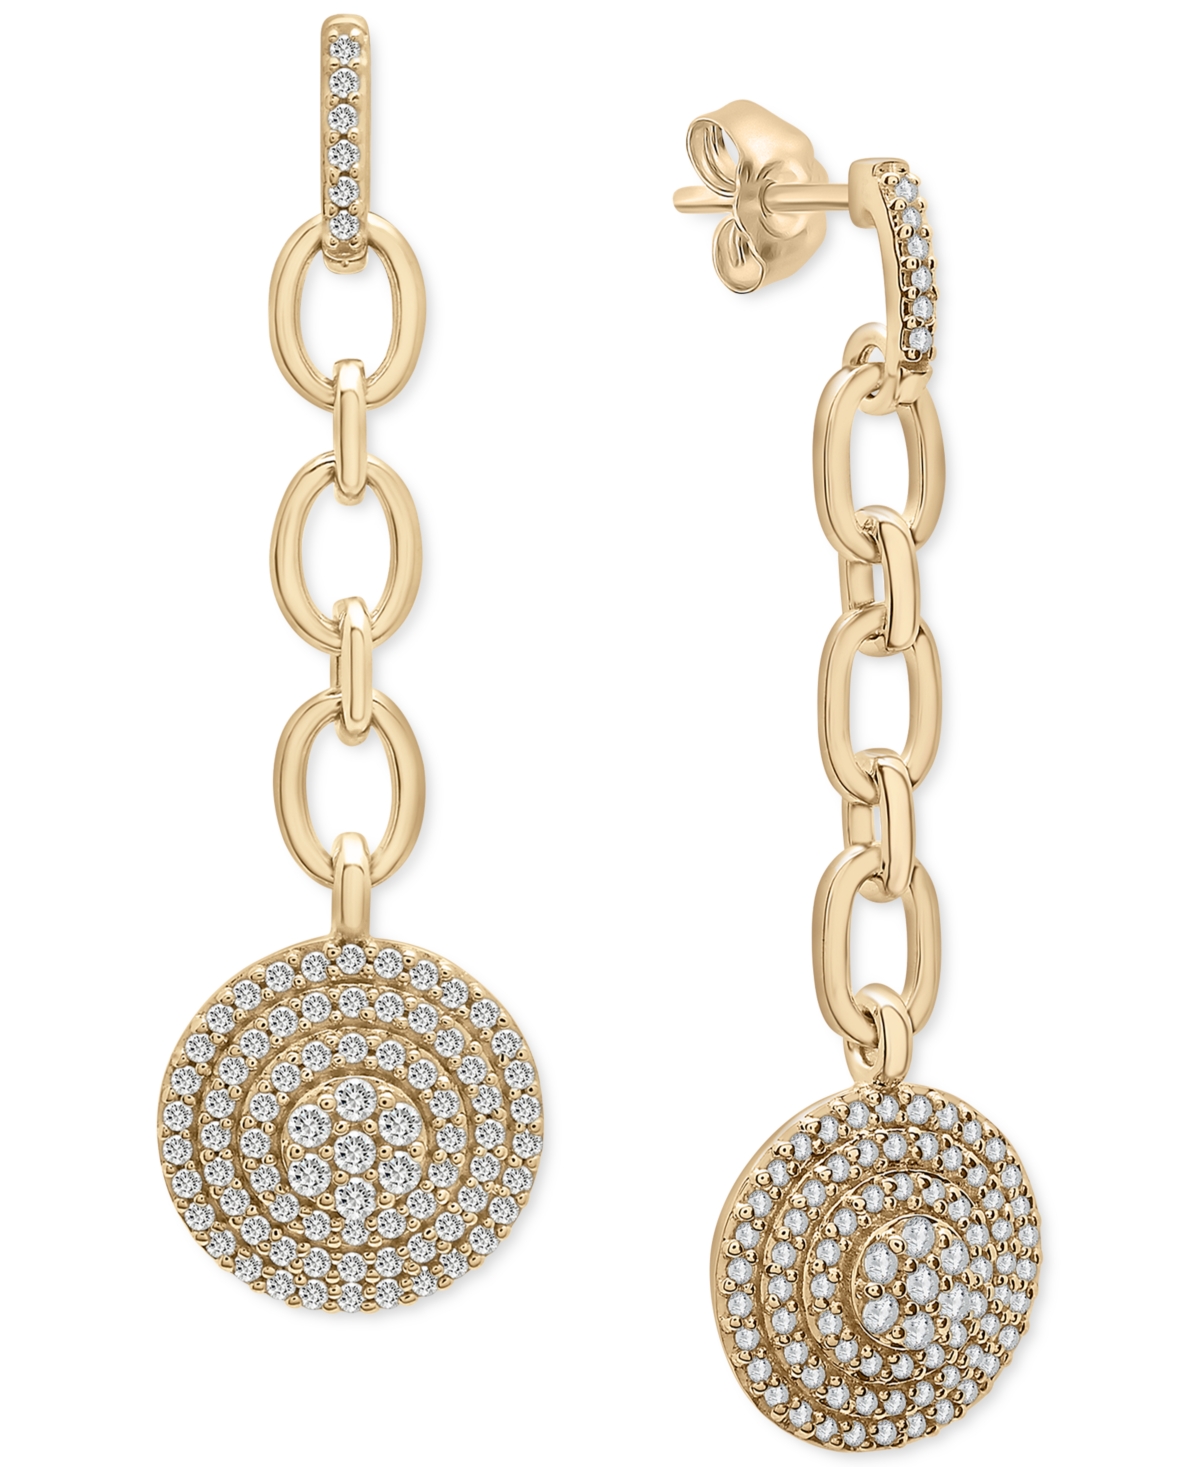 Diamond Circle Cluster Chain Drop Earrings (3/4 ct. t.w.) in 14k Gold, Created for Macy's - Yellow Gold